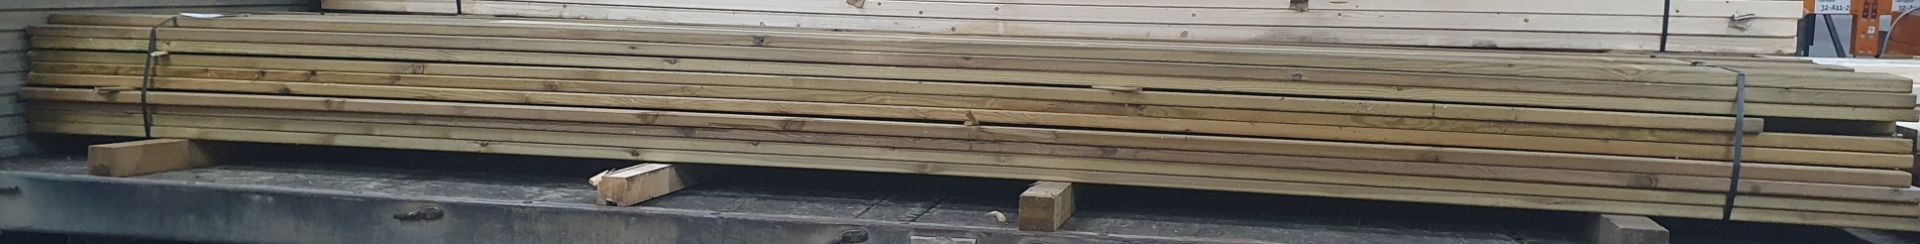 55 x Lengths of Decking | Size: (L) 420cm x (W) 14cm x (H) 3cm - Image 2 of 6